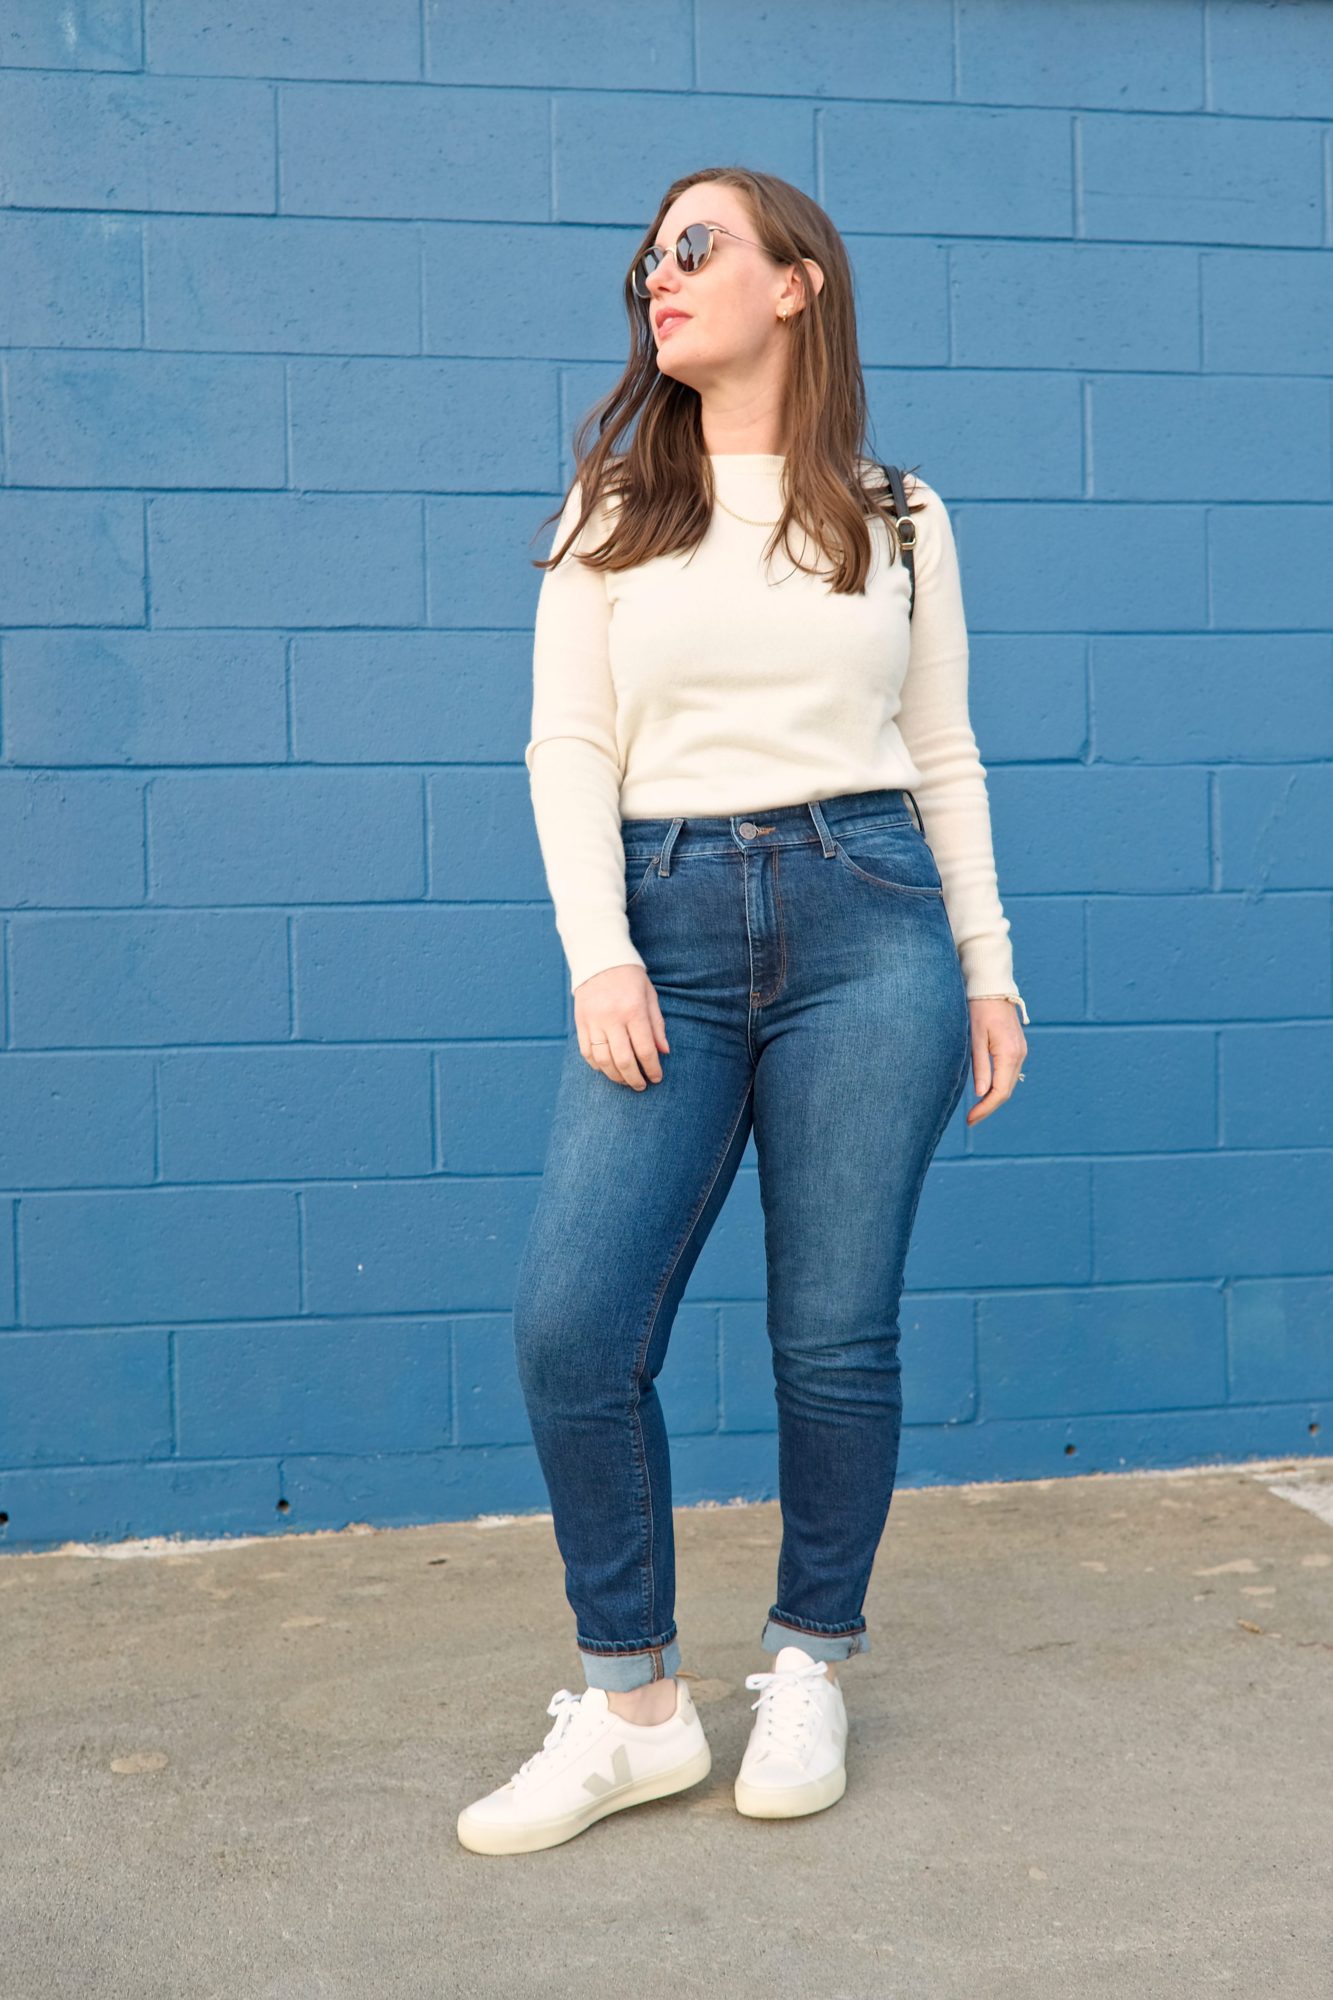 Alyssa wears a white sweater with blue jeans and white sneakers